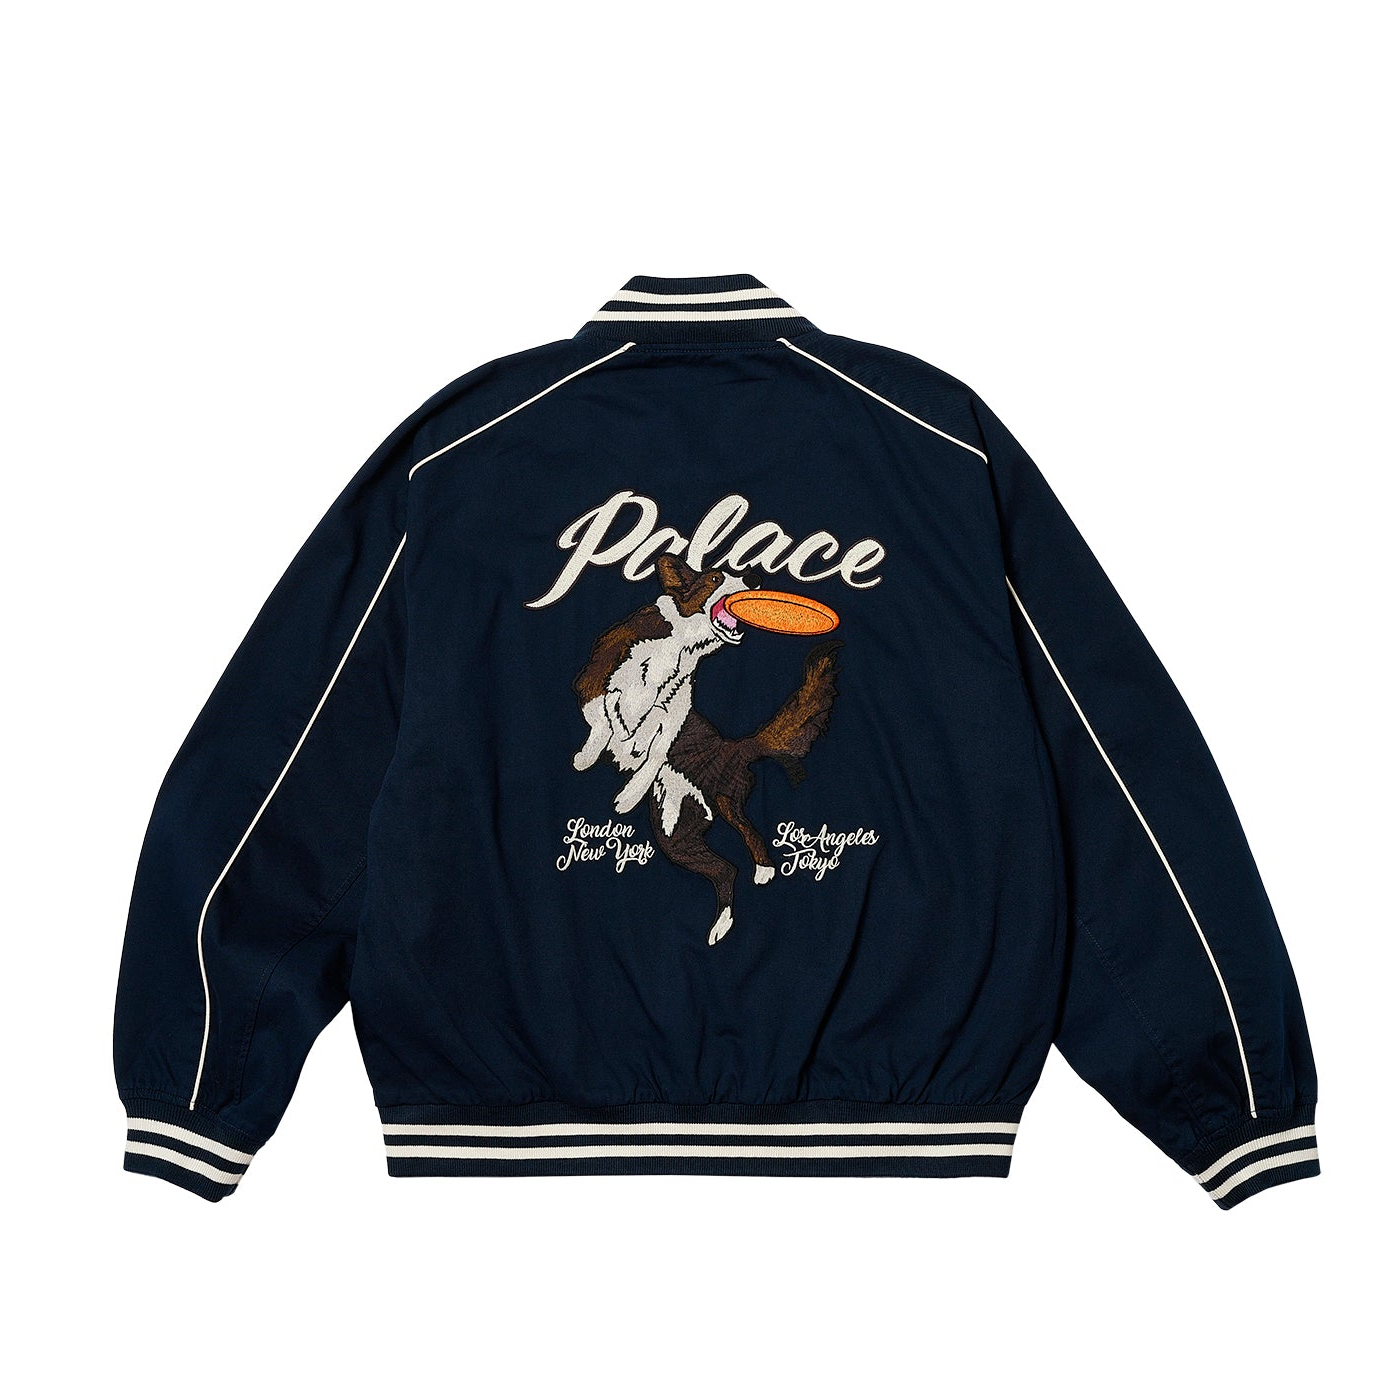 Thumbnail CATCH IT BOMBER JACKET NAVY one color